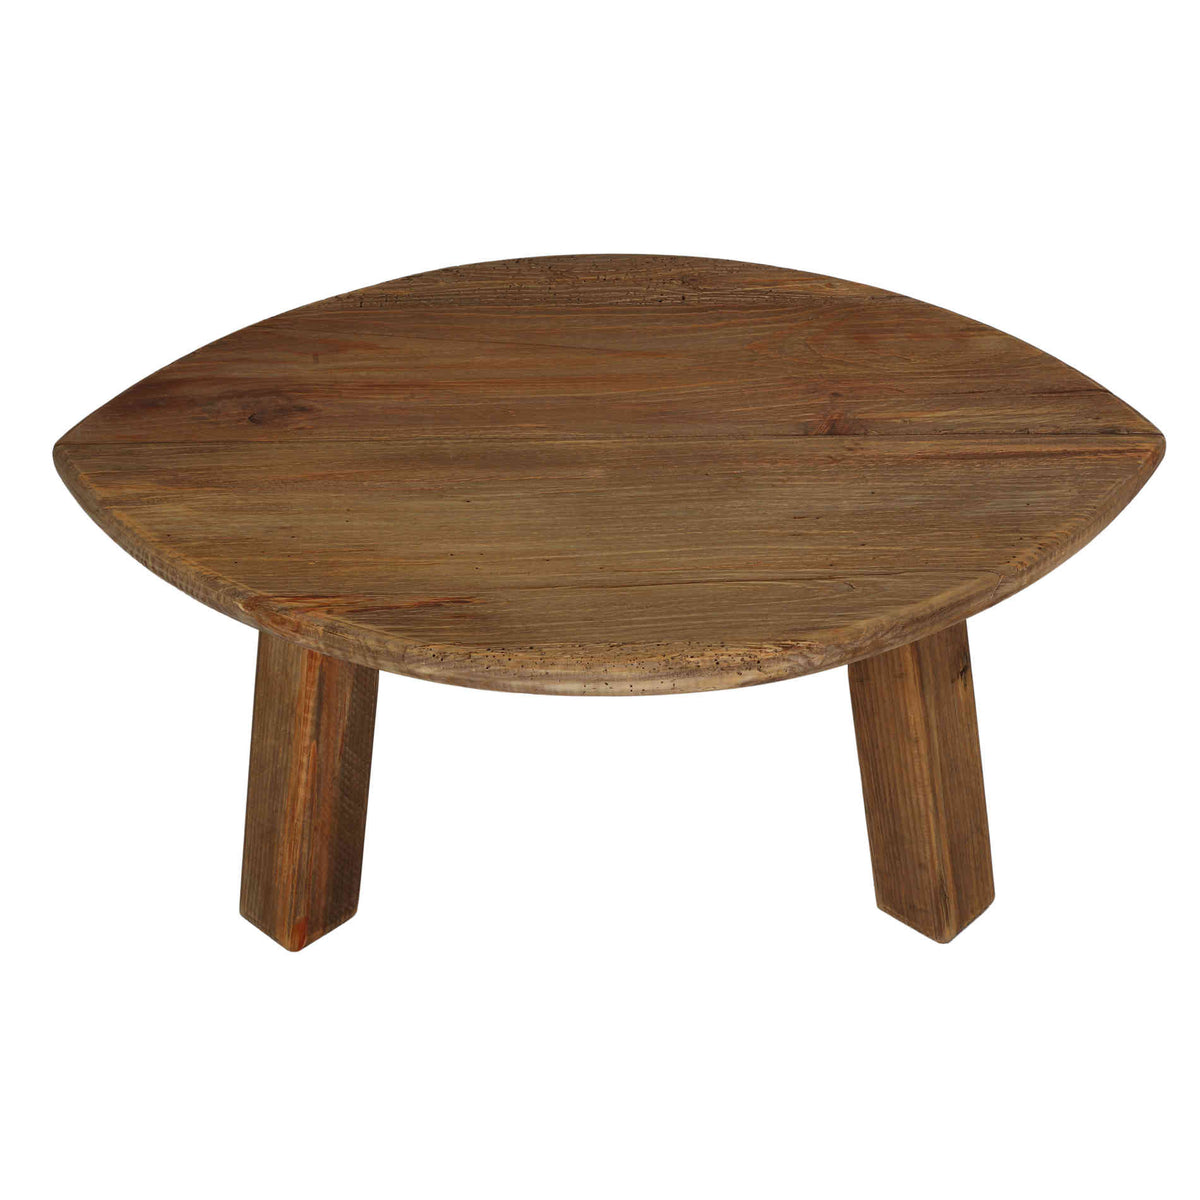 Bare Decor Wilder Oval Coffee Table, Solid Reclaimed Wood, Small 22x19x11